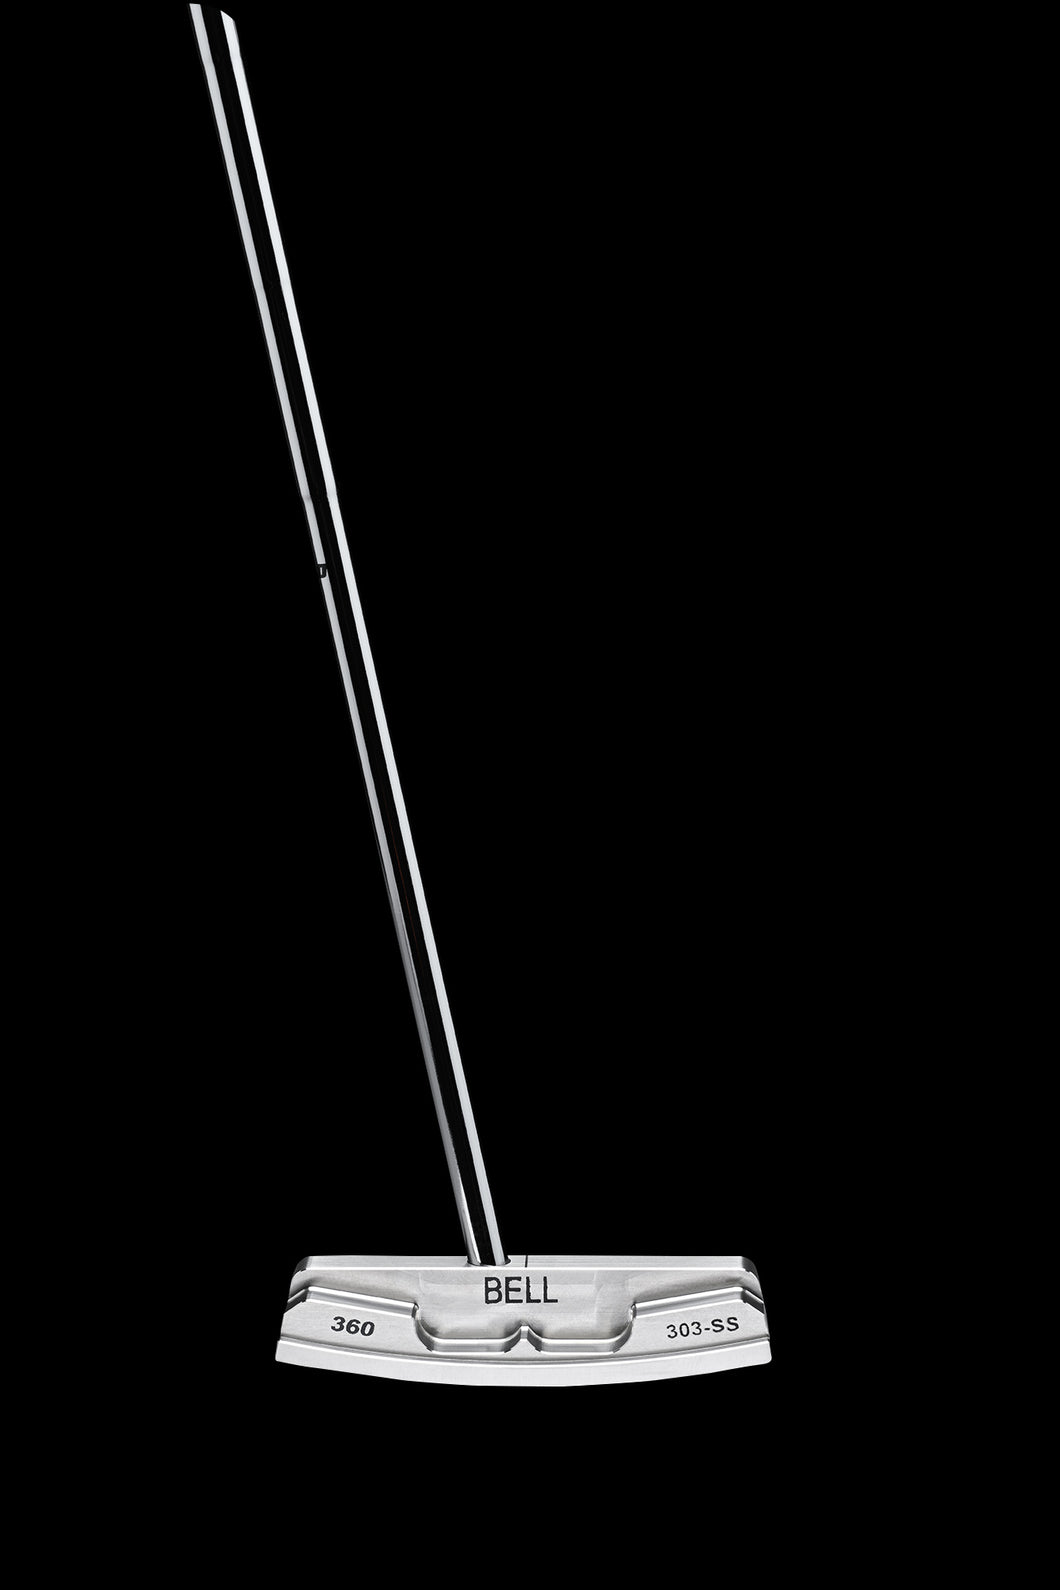 Bell N-360 No Offset Right Hand Upright Lie 79 Degrees Toe Balance Polished Putter - Right Hand